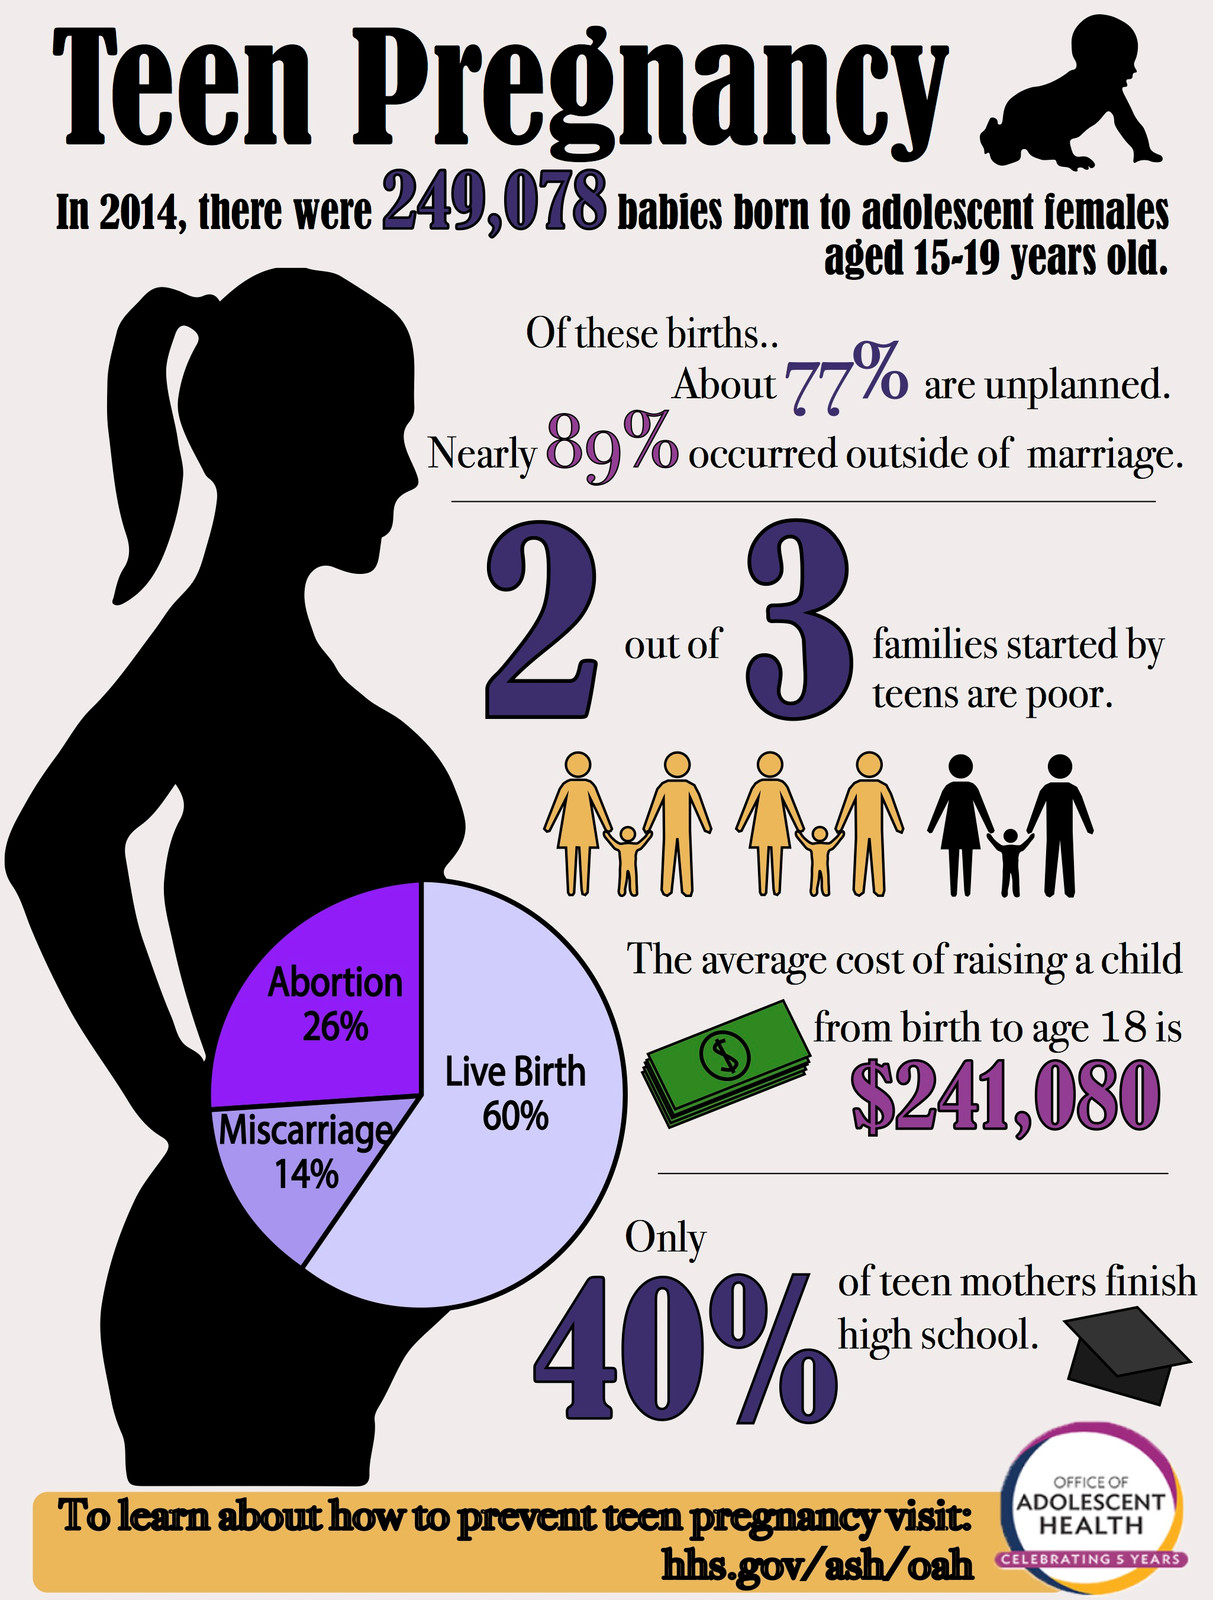 How To Make An Infographic About Pregnancy In Adolescence